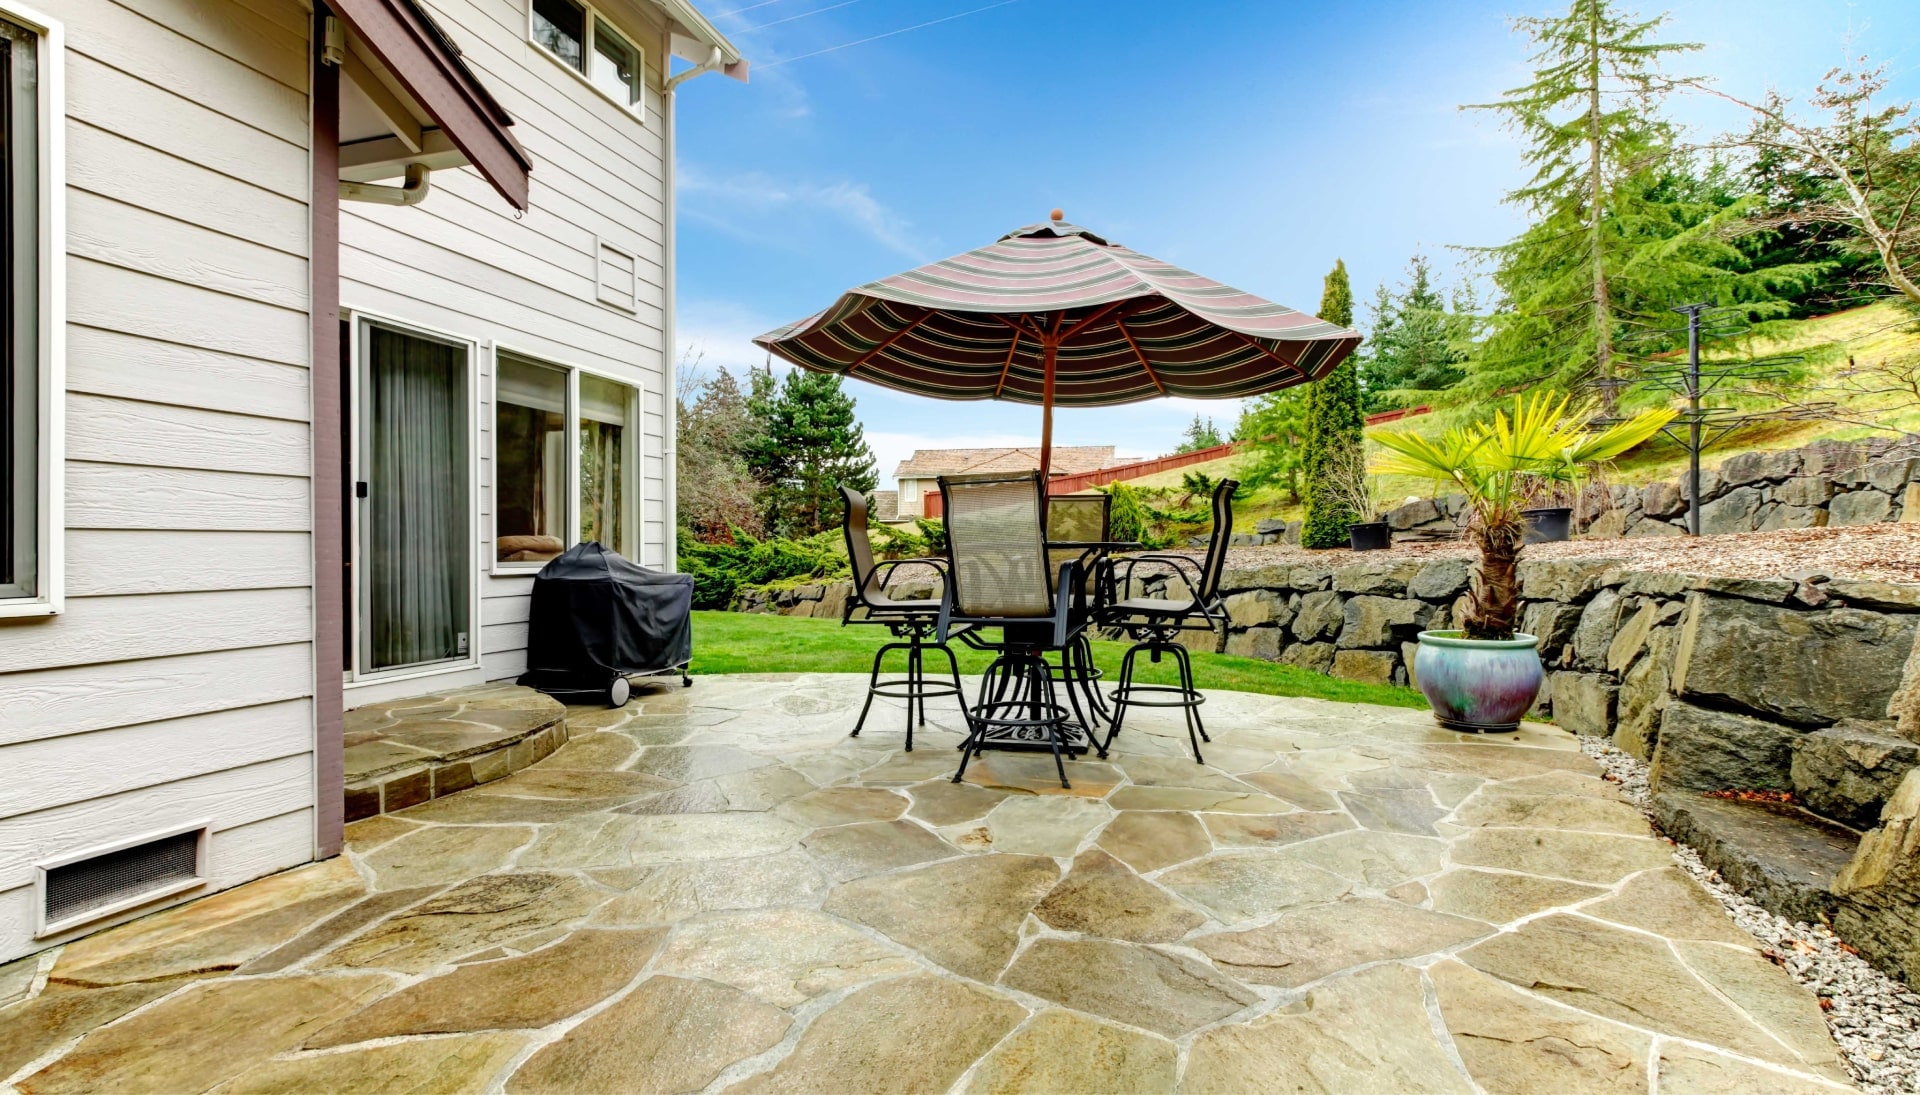 Beautifully Textured and Patterned Concrete Patios in Kalispell, Montana area!